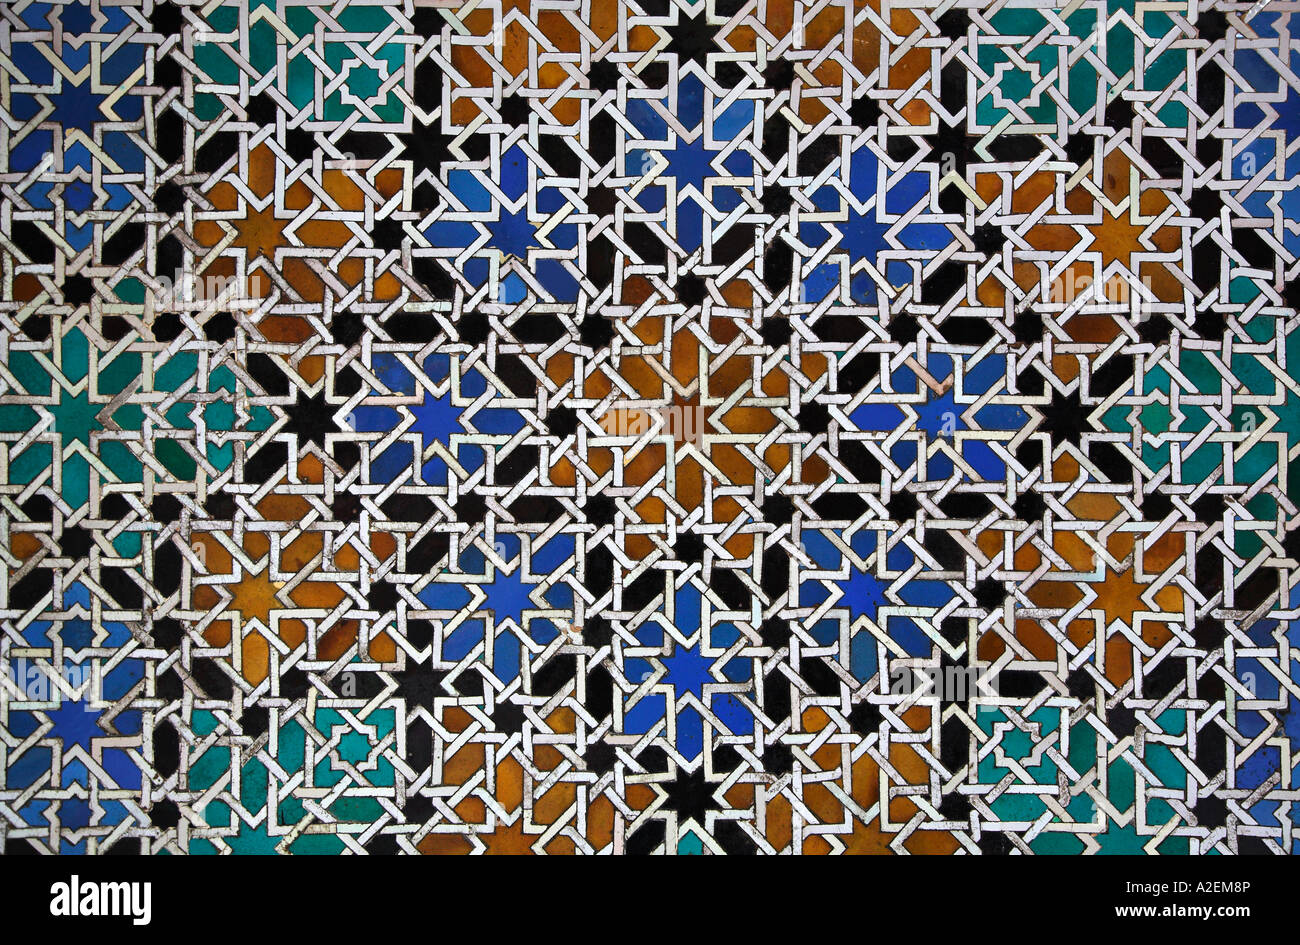 Islamic abstract decor of the Real Alcazar Palace in Seville Andalucia Spain Stock Photo